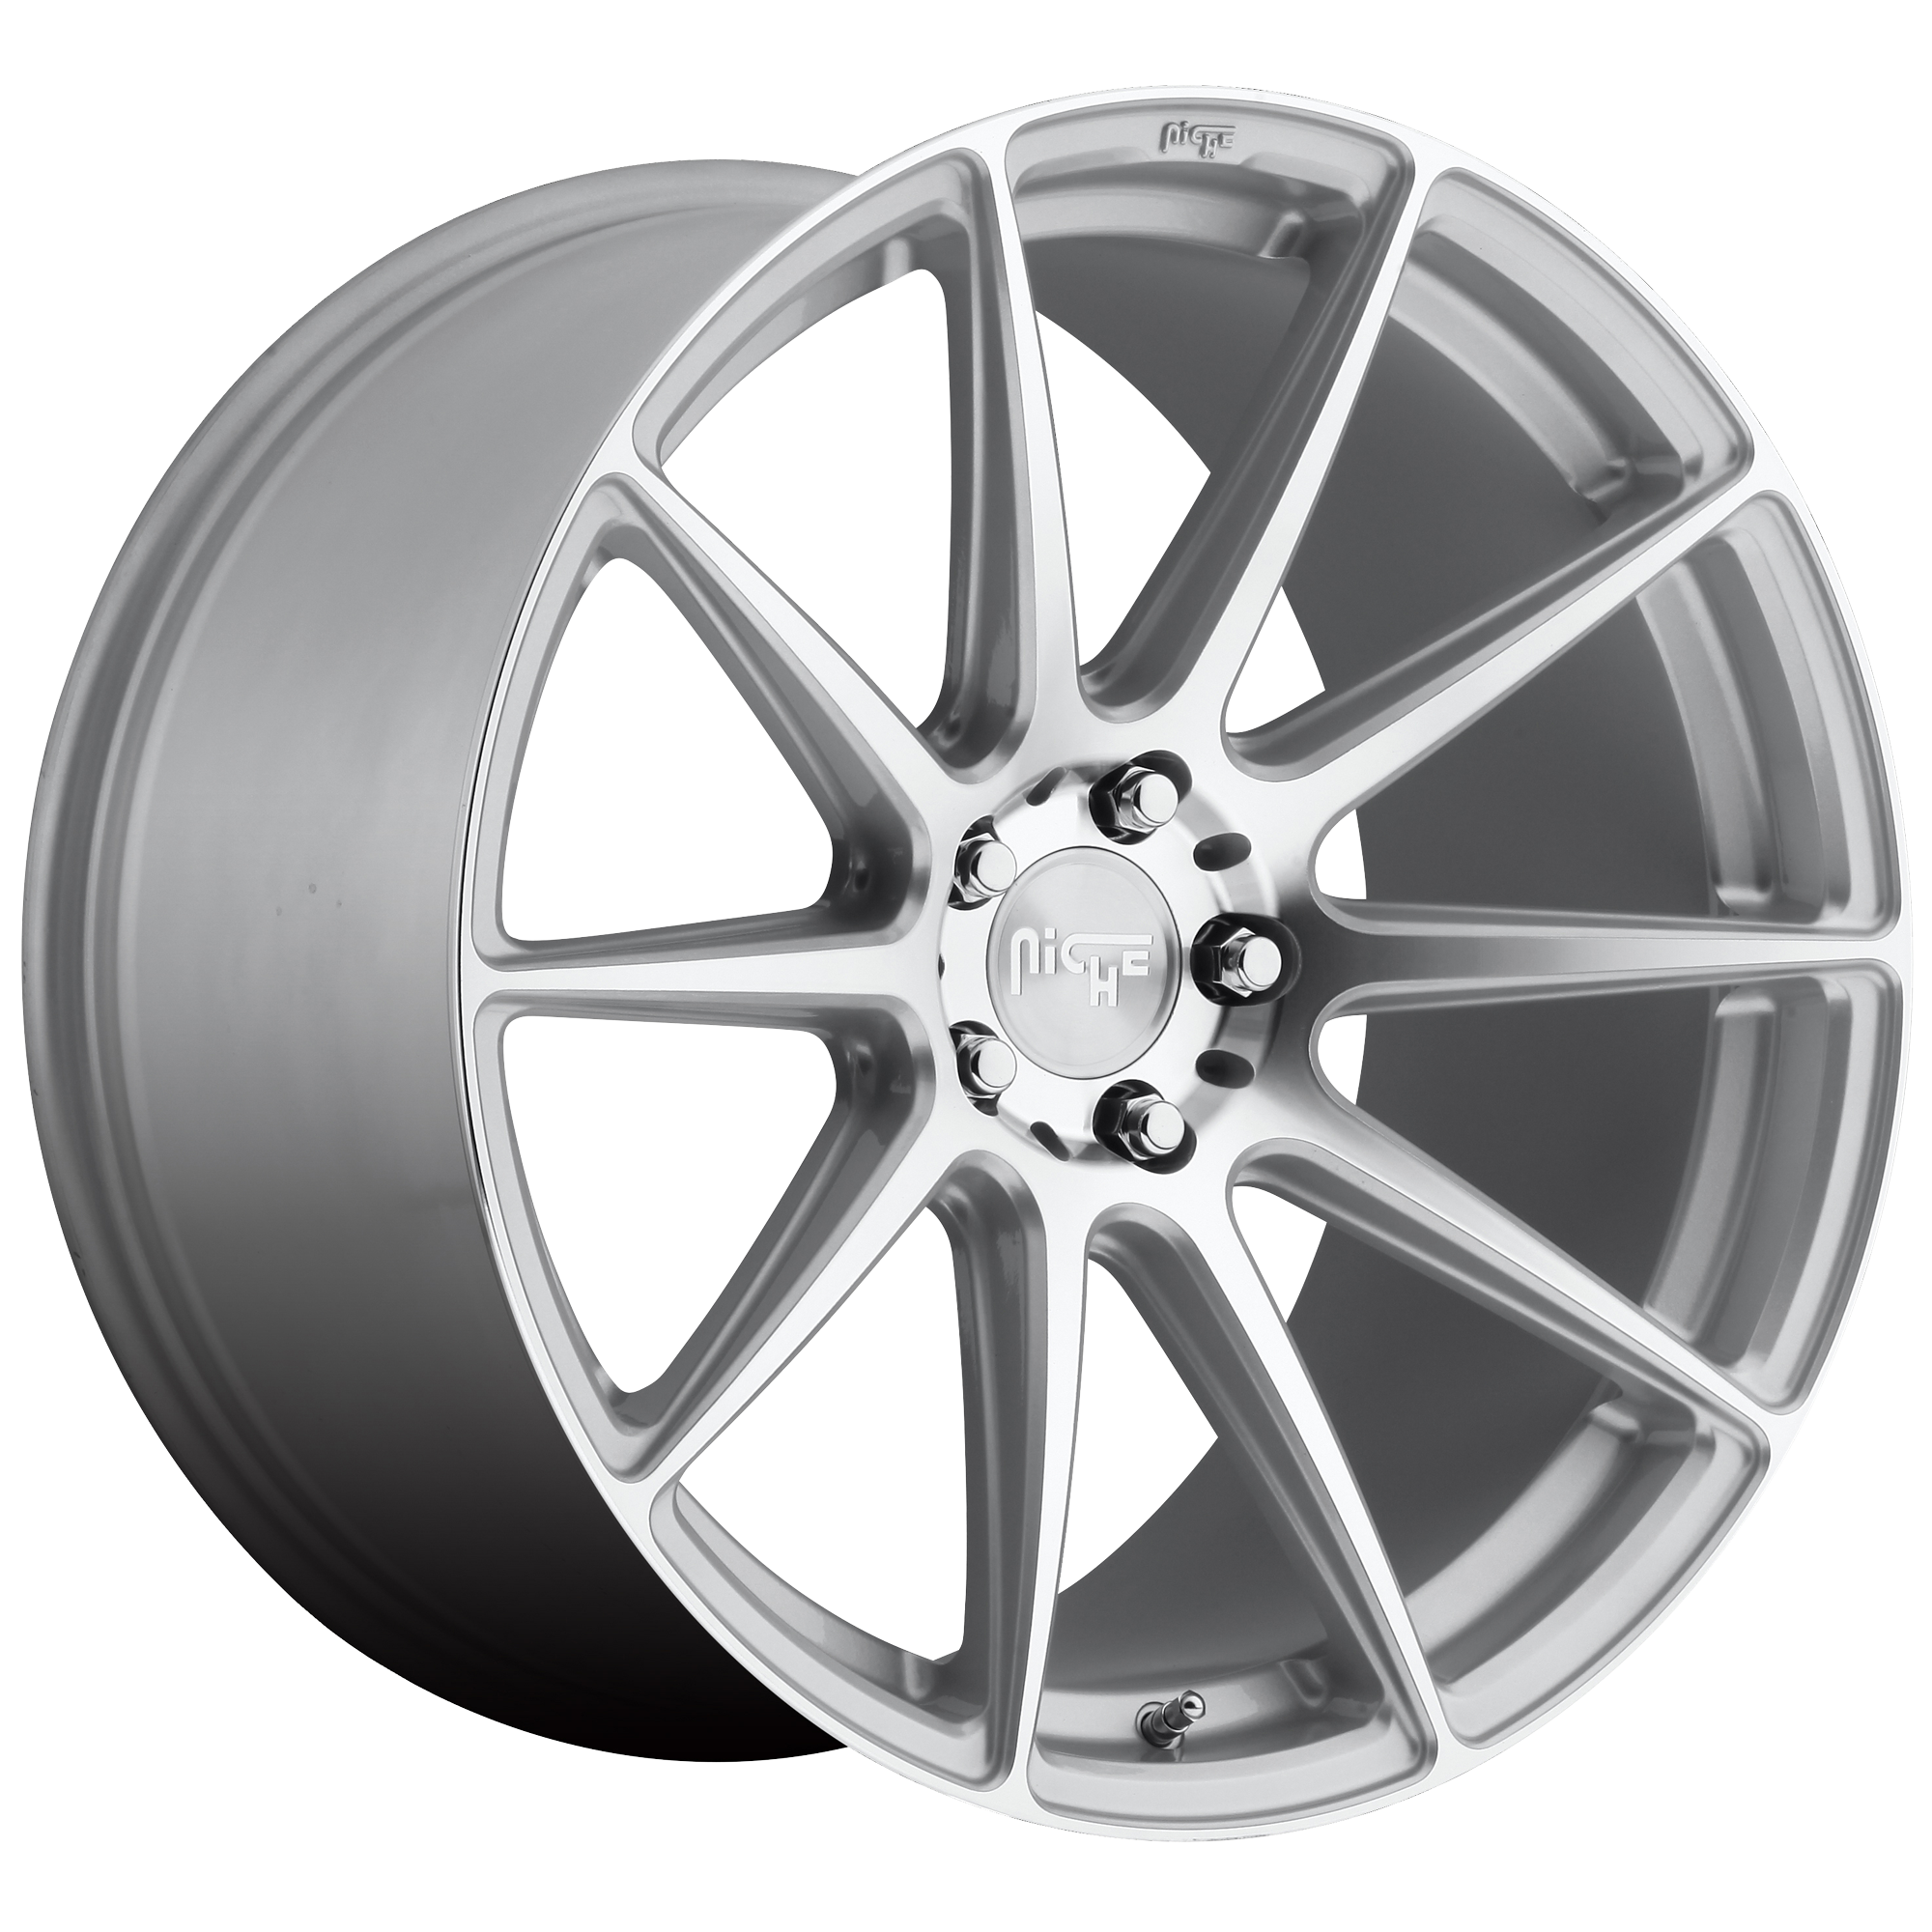 ESSEN 20x9 5x114.30 GLOSS SILVER MACHINED (35 mm) - Tires and Engine Performance